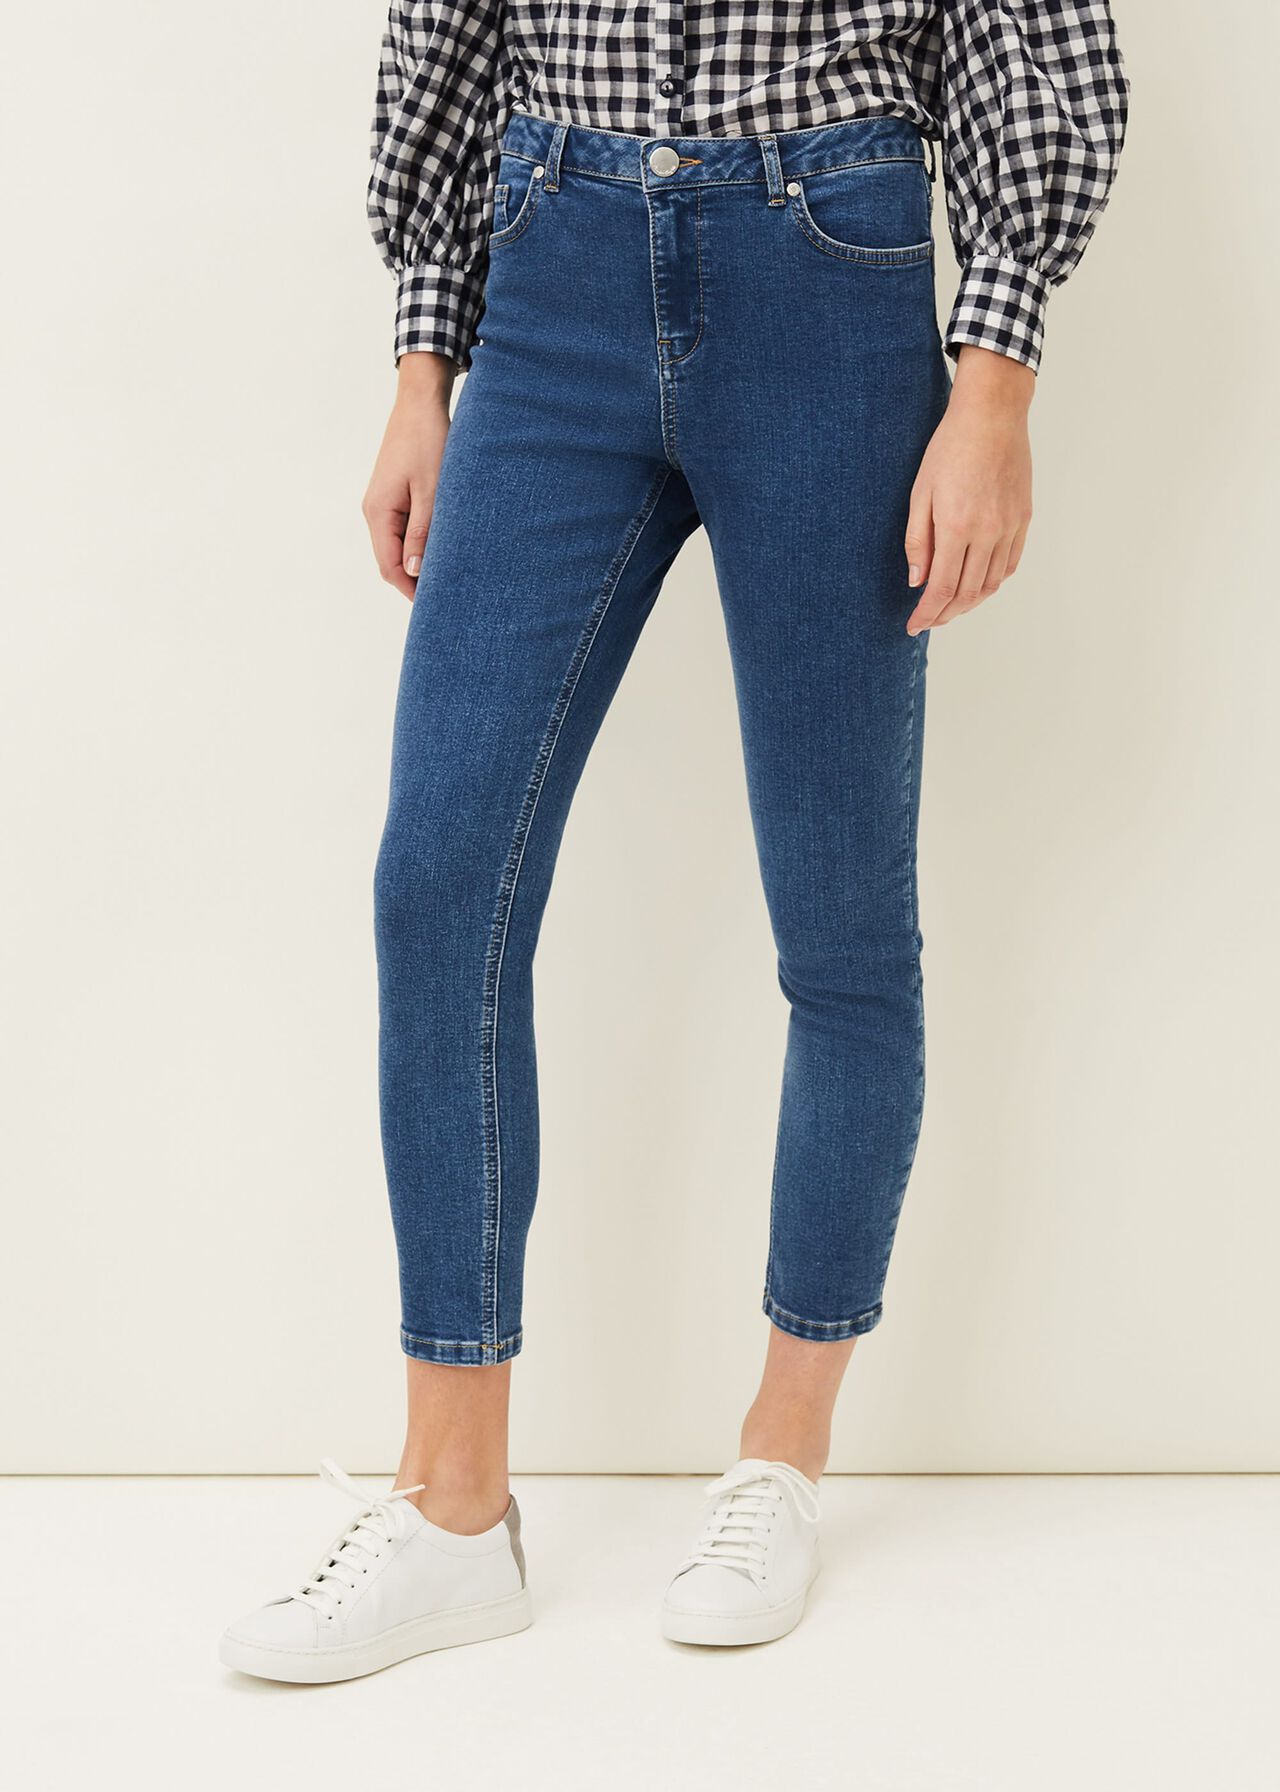 Pax Slim Fit Cropped Jeans | Phase Eight UK